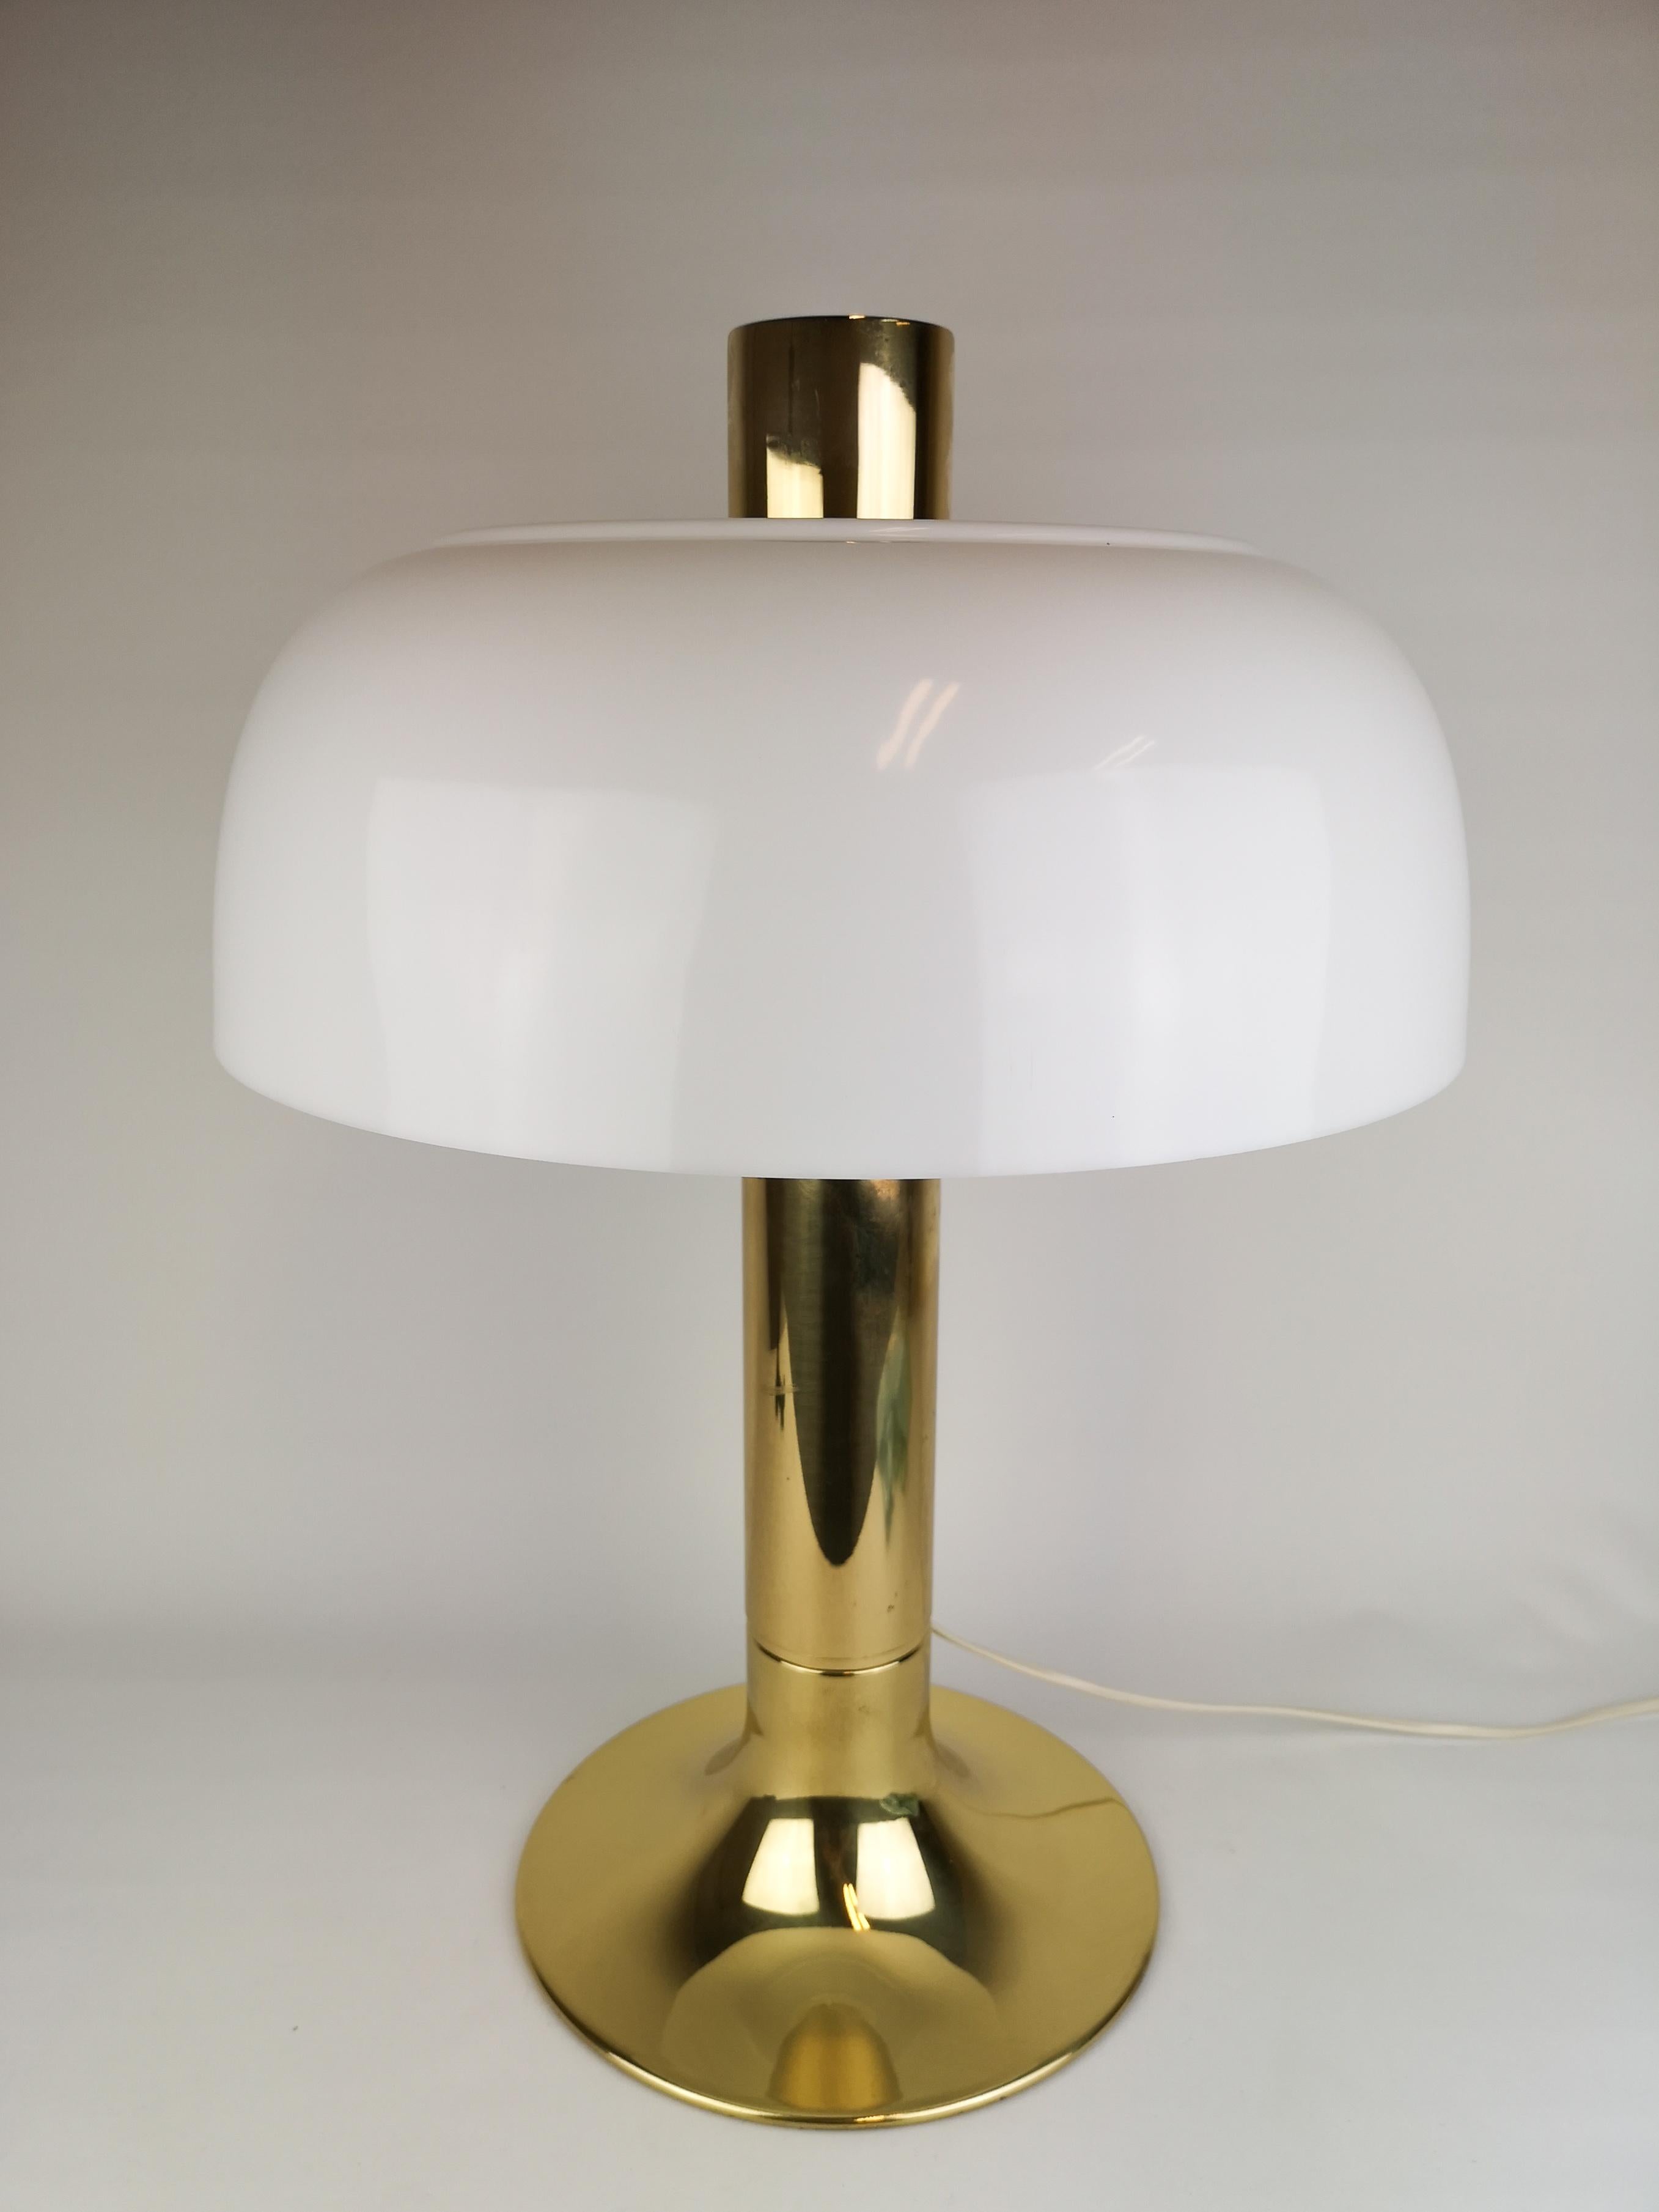 This Rare table lamp, model B-205 was designed by Hans-Agne Jakobsson. Produced by Hans-Agne Jakobsson in Markaryd, Sweden.

The overall condition is good.

Measures H 58 cm, D 39 cm.